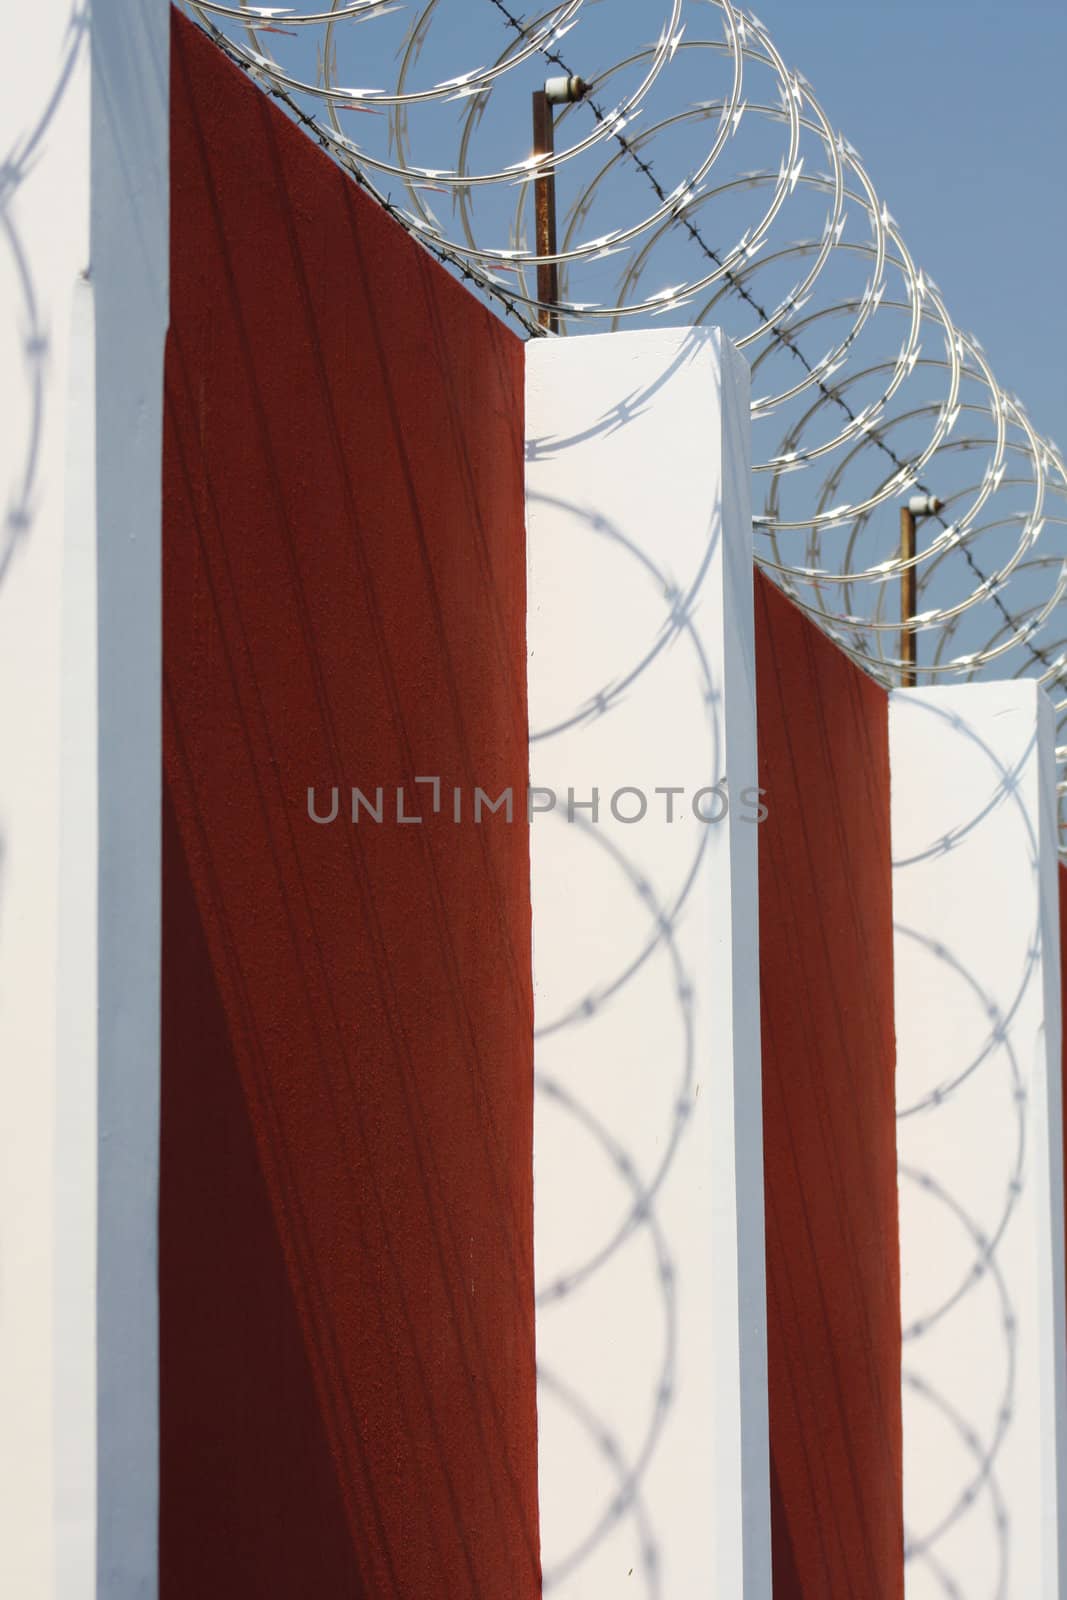 Razor wire and barbed wire on top of a red wall with white pillars, with the wire casting interesting shadows on the pillars.